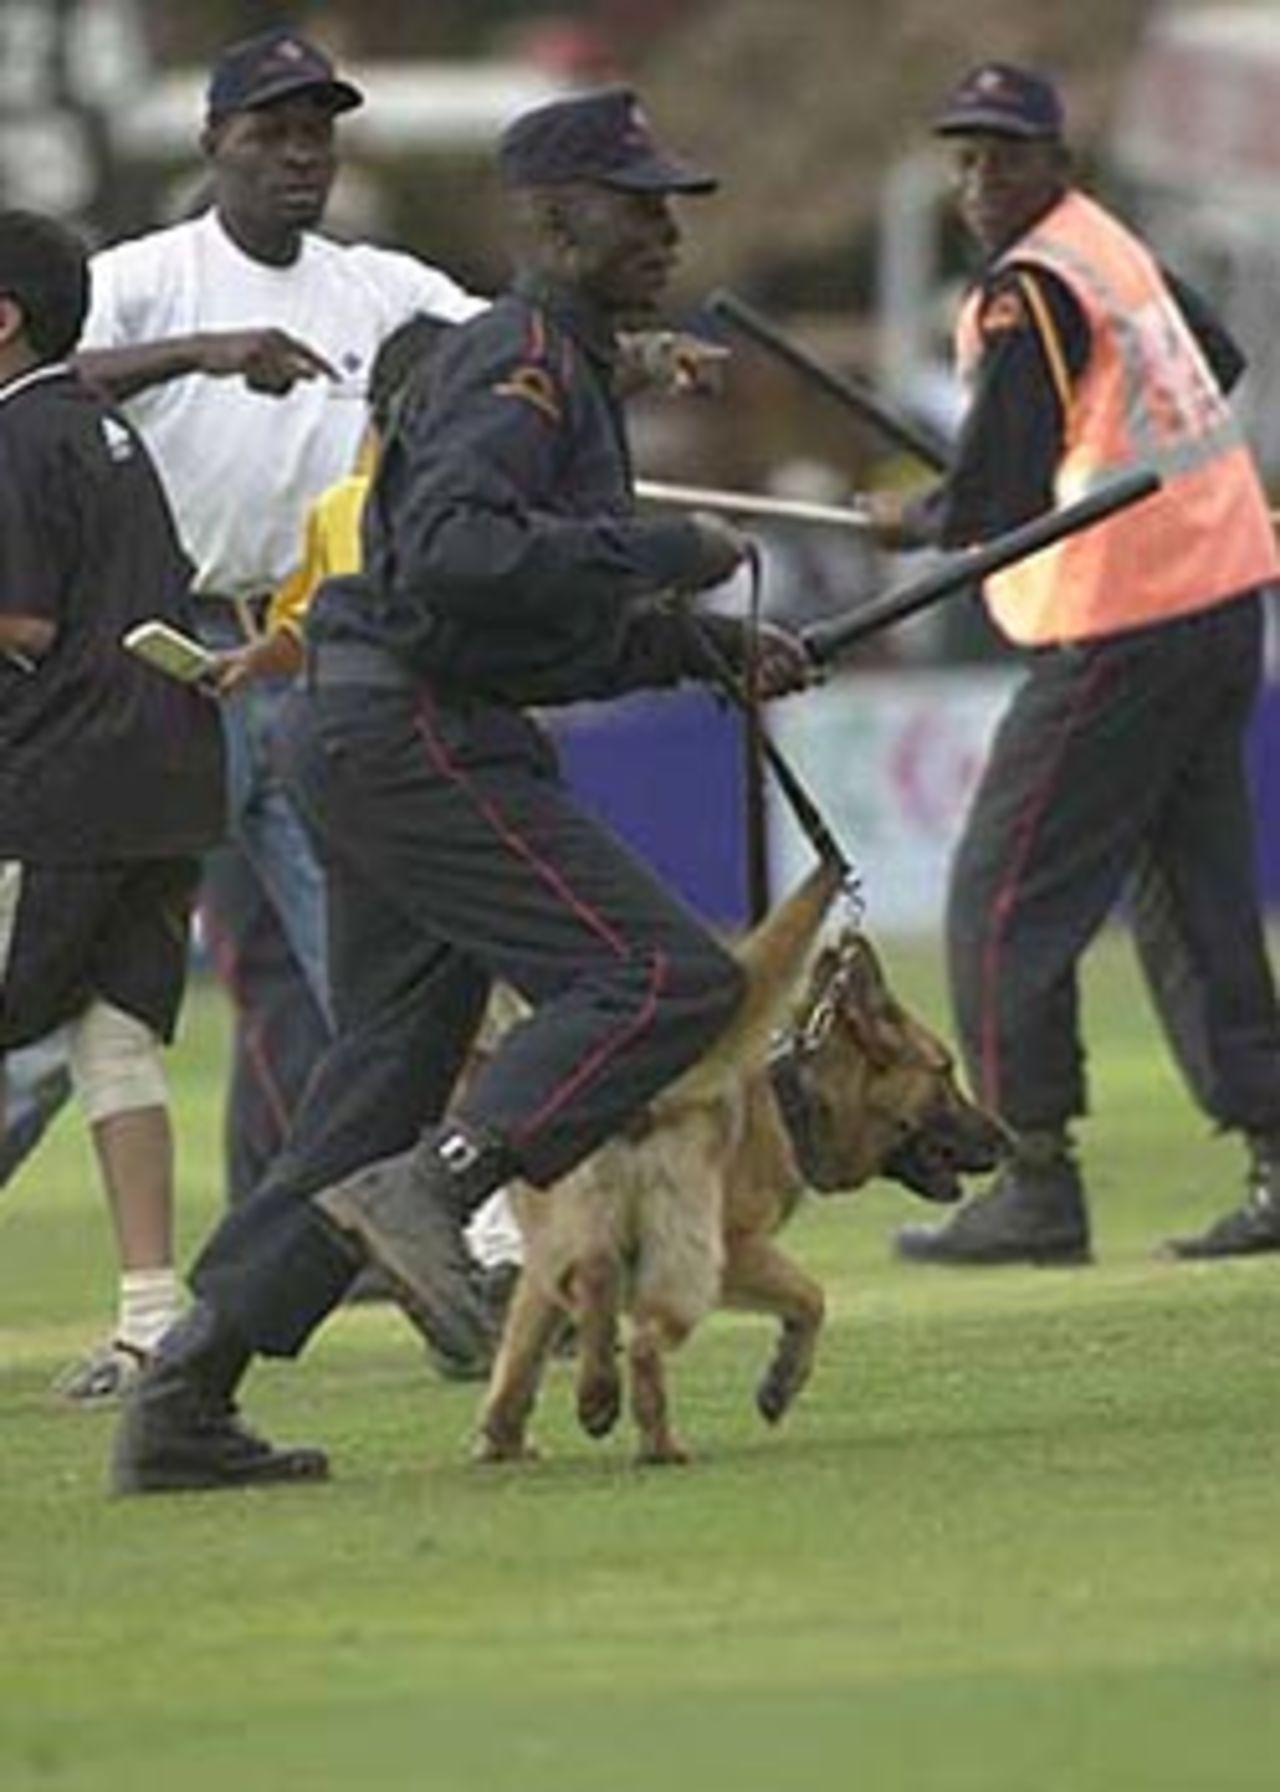 Security guards with sniffer dogs on rounds, Gymkhana at Nairobi